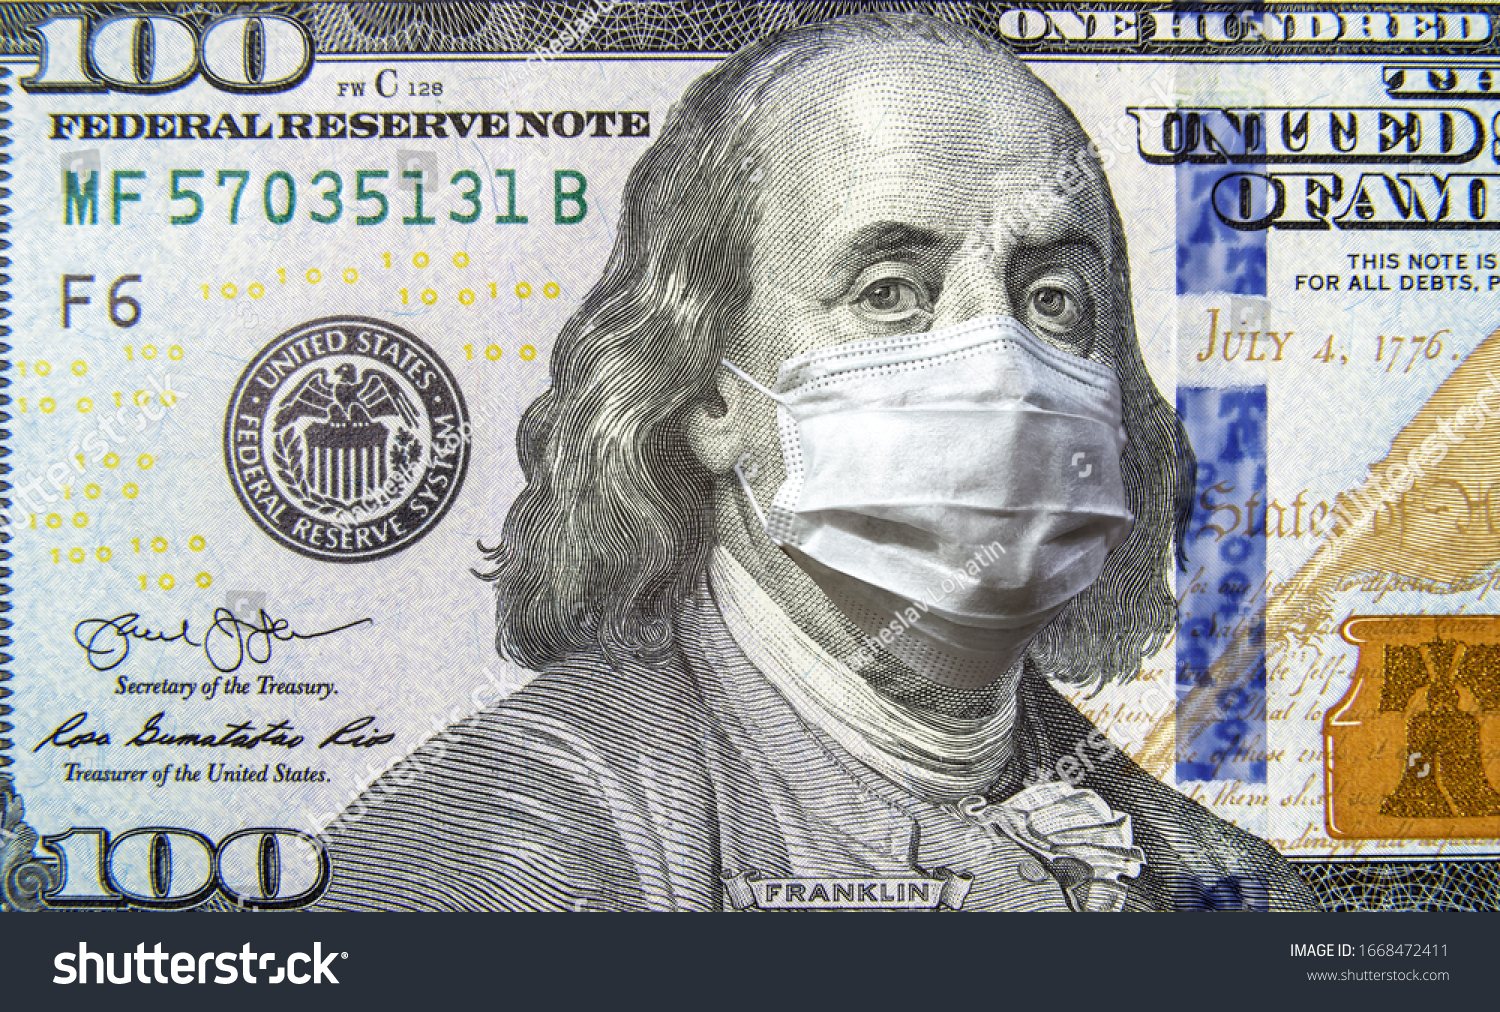 COVID-19 coronavirus in USA, 100 dollar money bill with face mask. Coronavirus affects global stock market. World economy hit by corona virus outbreak and pandemic fears. Crisis and finance concept. #1668472411